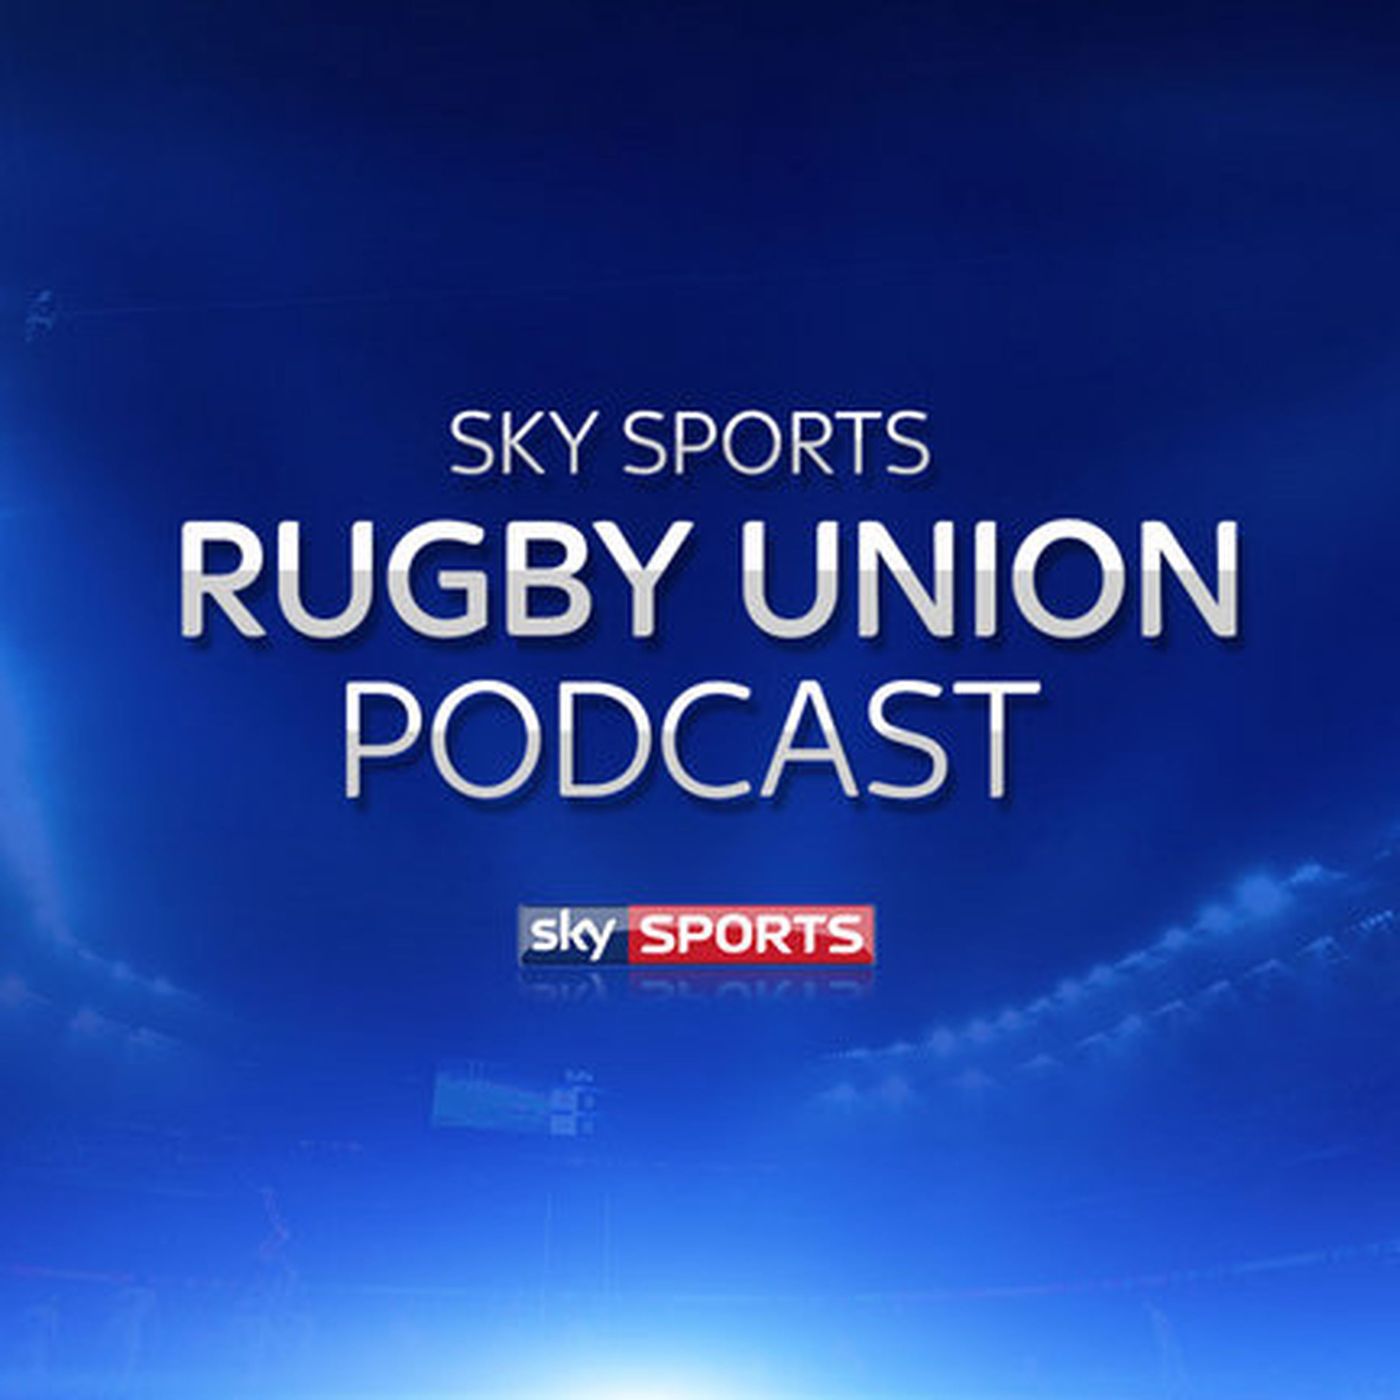 Sky Sports Rugby Union Podcast - 2nd March